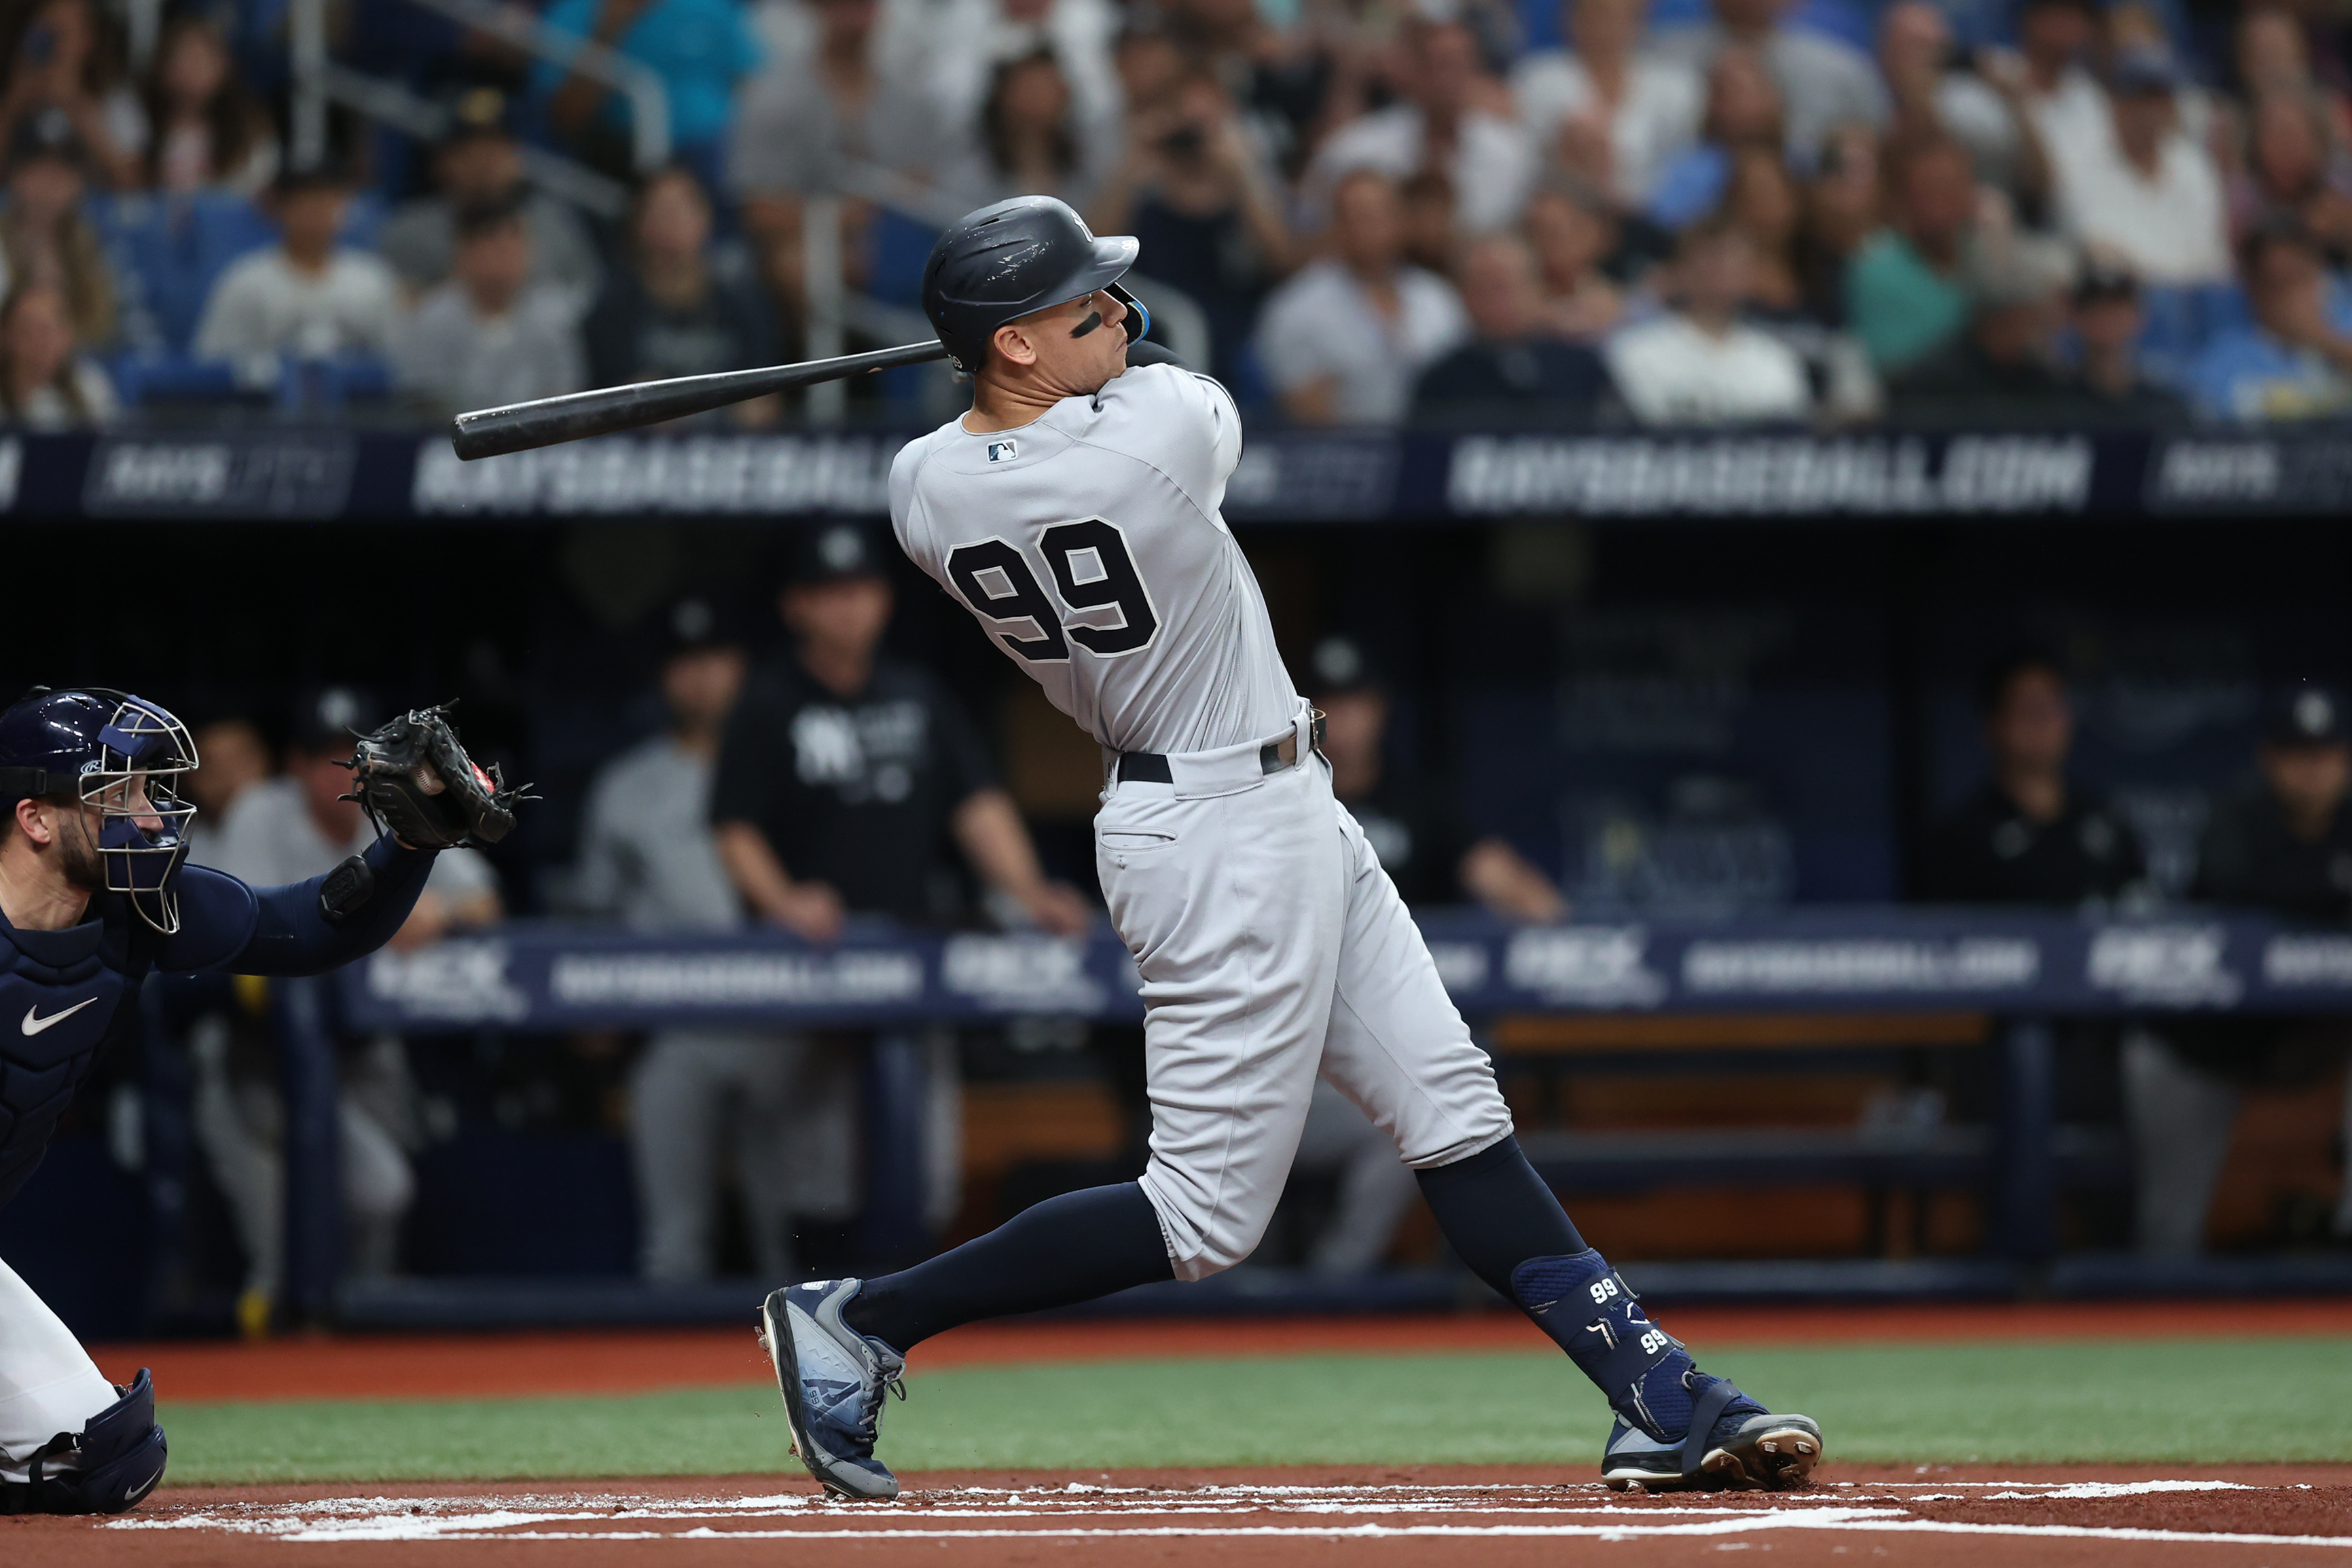 Aaron Judge & Paul Goldschmidt are the new leaders of the latest